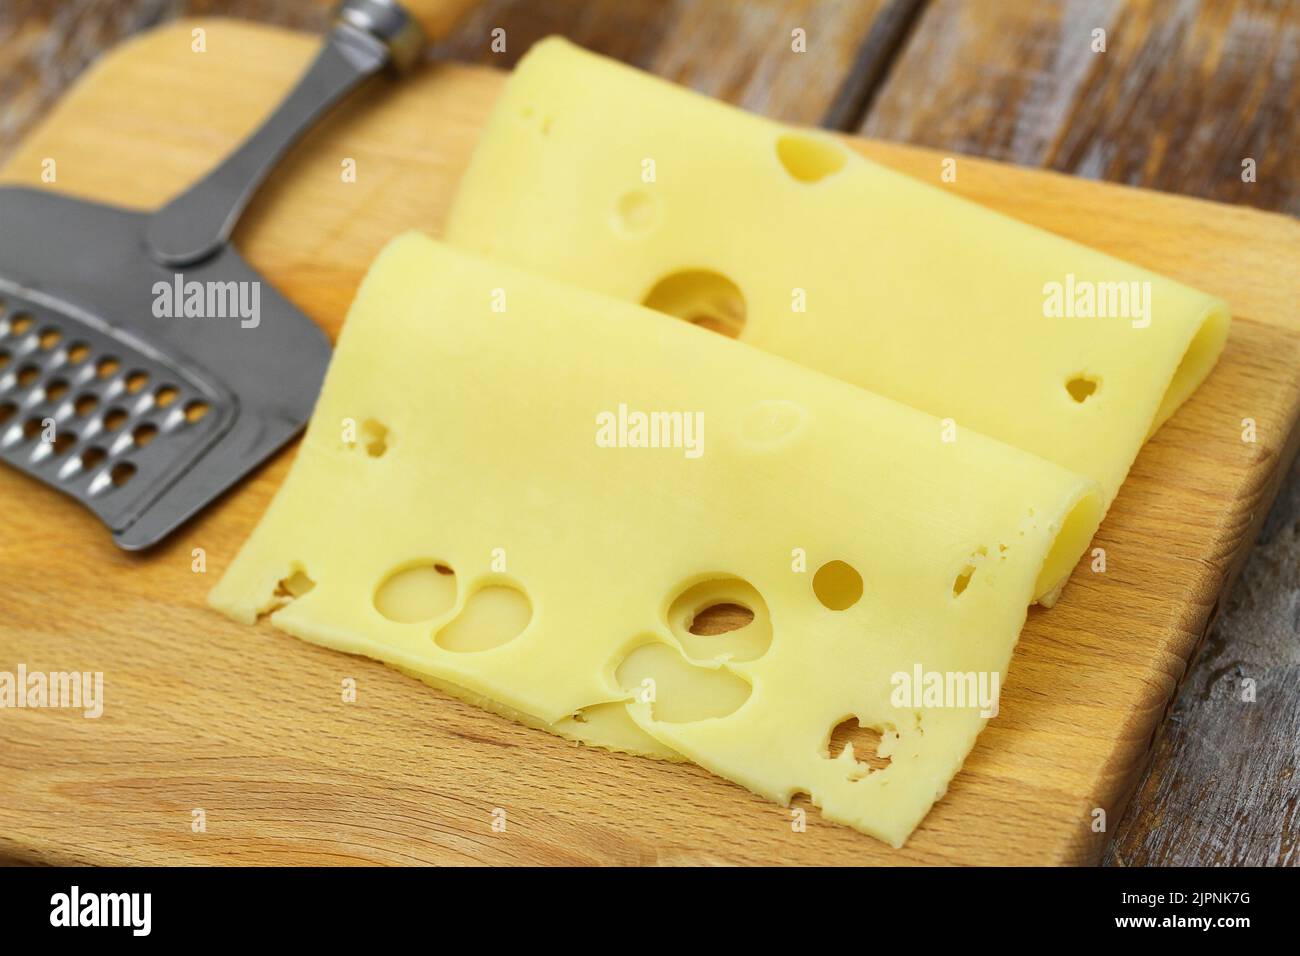 Slices of tasty Swiss cheese on wooden board Stock Photo